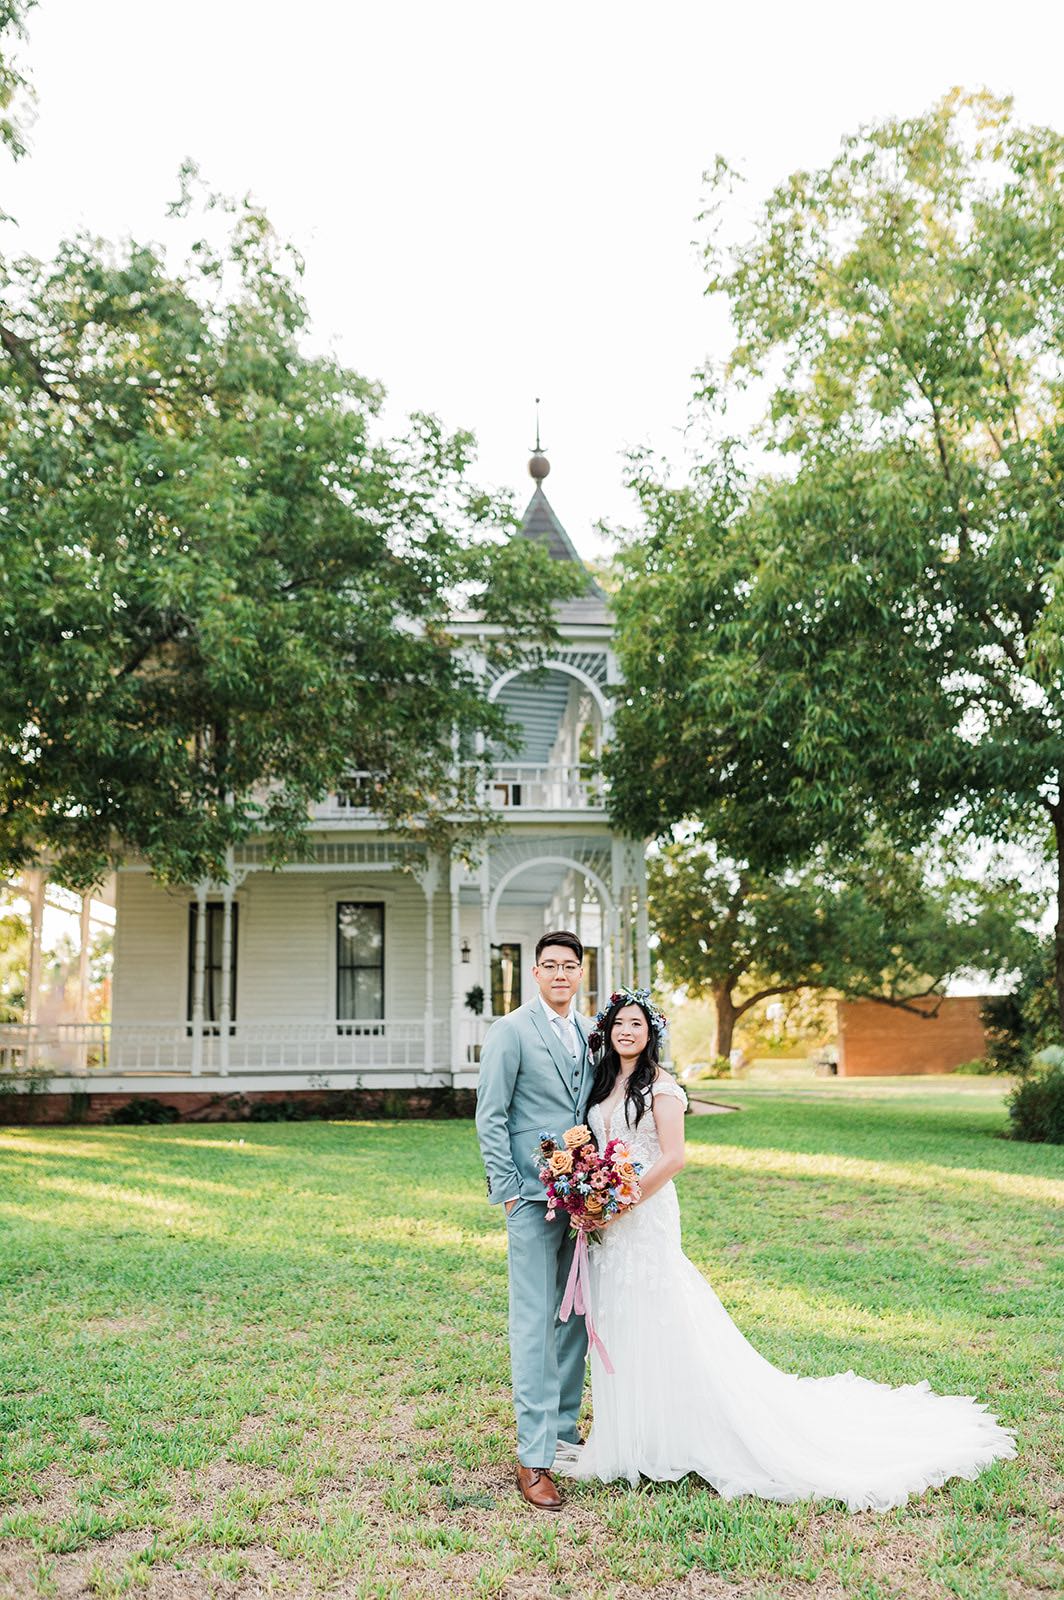 Bride and Groom with colorful bouquet at Barr Mansion